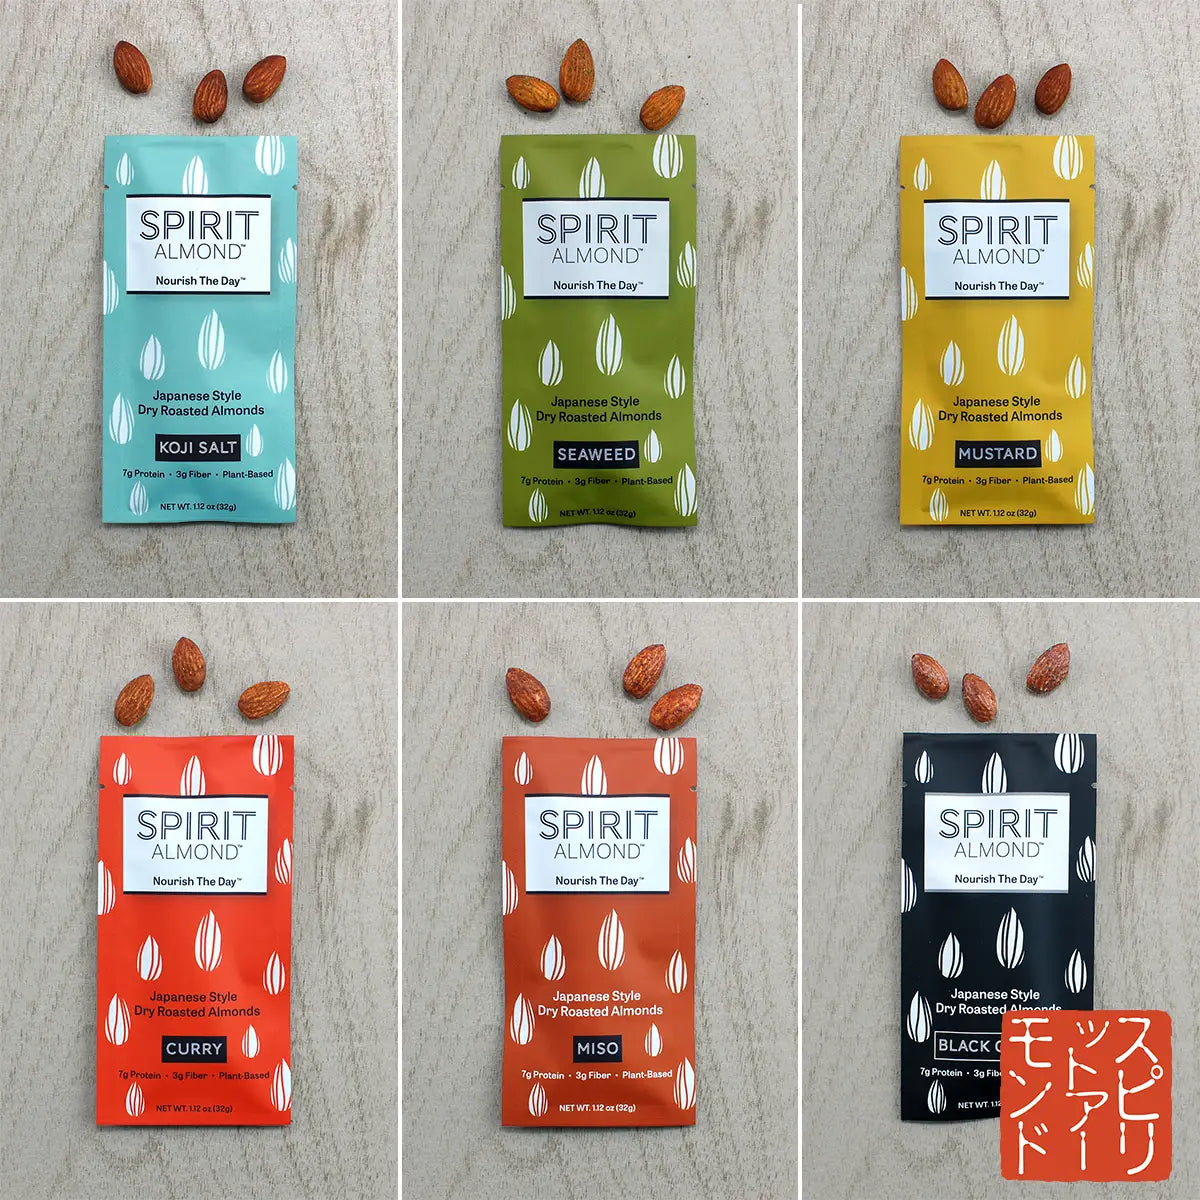 SPIRIT Almond Japanese Style Dry Roasted Almonds colorful lineup, six flavors. Koji Salt, light blue. Seaweed, green. Mustard, yellow. Curry, reddish orange. Miso, brownish-red. Black Garlic, black. Each in 1.12 oz. single serving bags and a few almonds of each flavor above each bag.